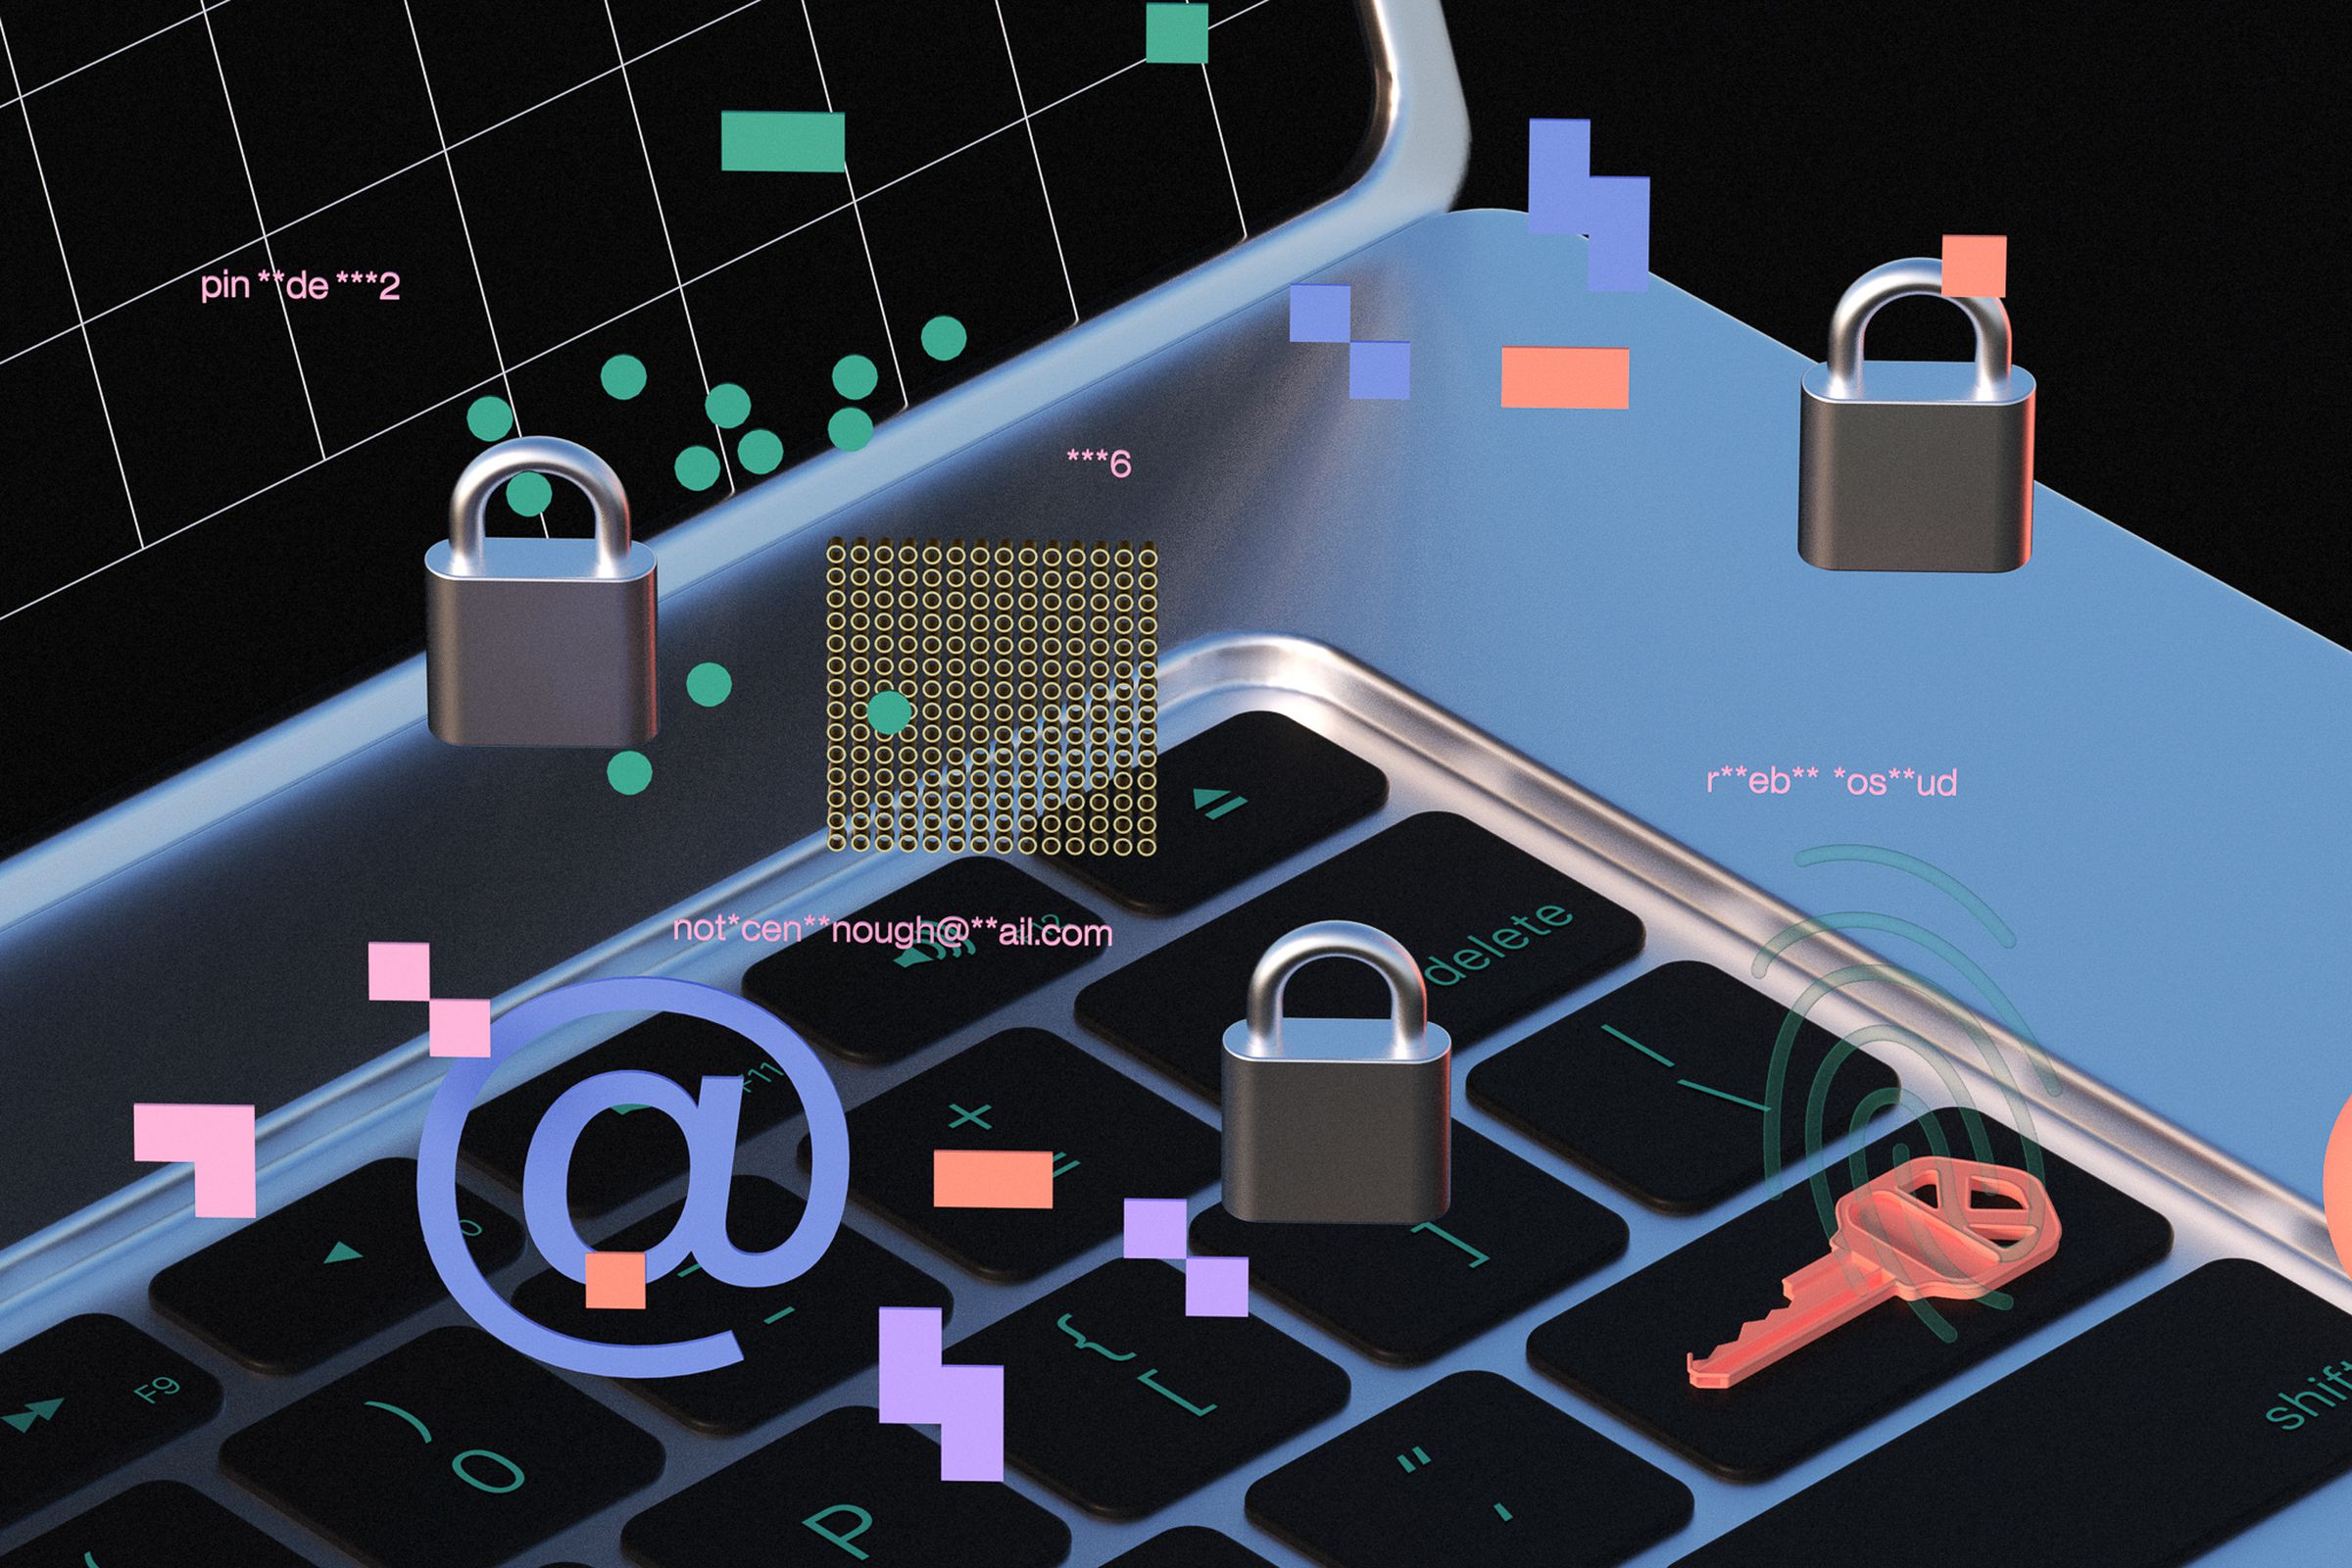 An illustration of a laptop with three locks, a key, an at sign, a key and colorful pixels all randomly placed around the image.